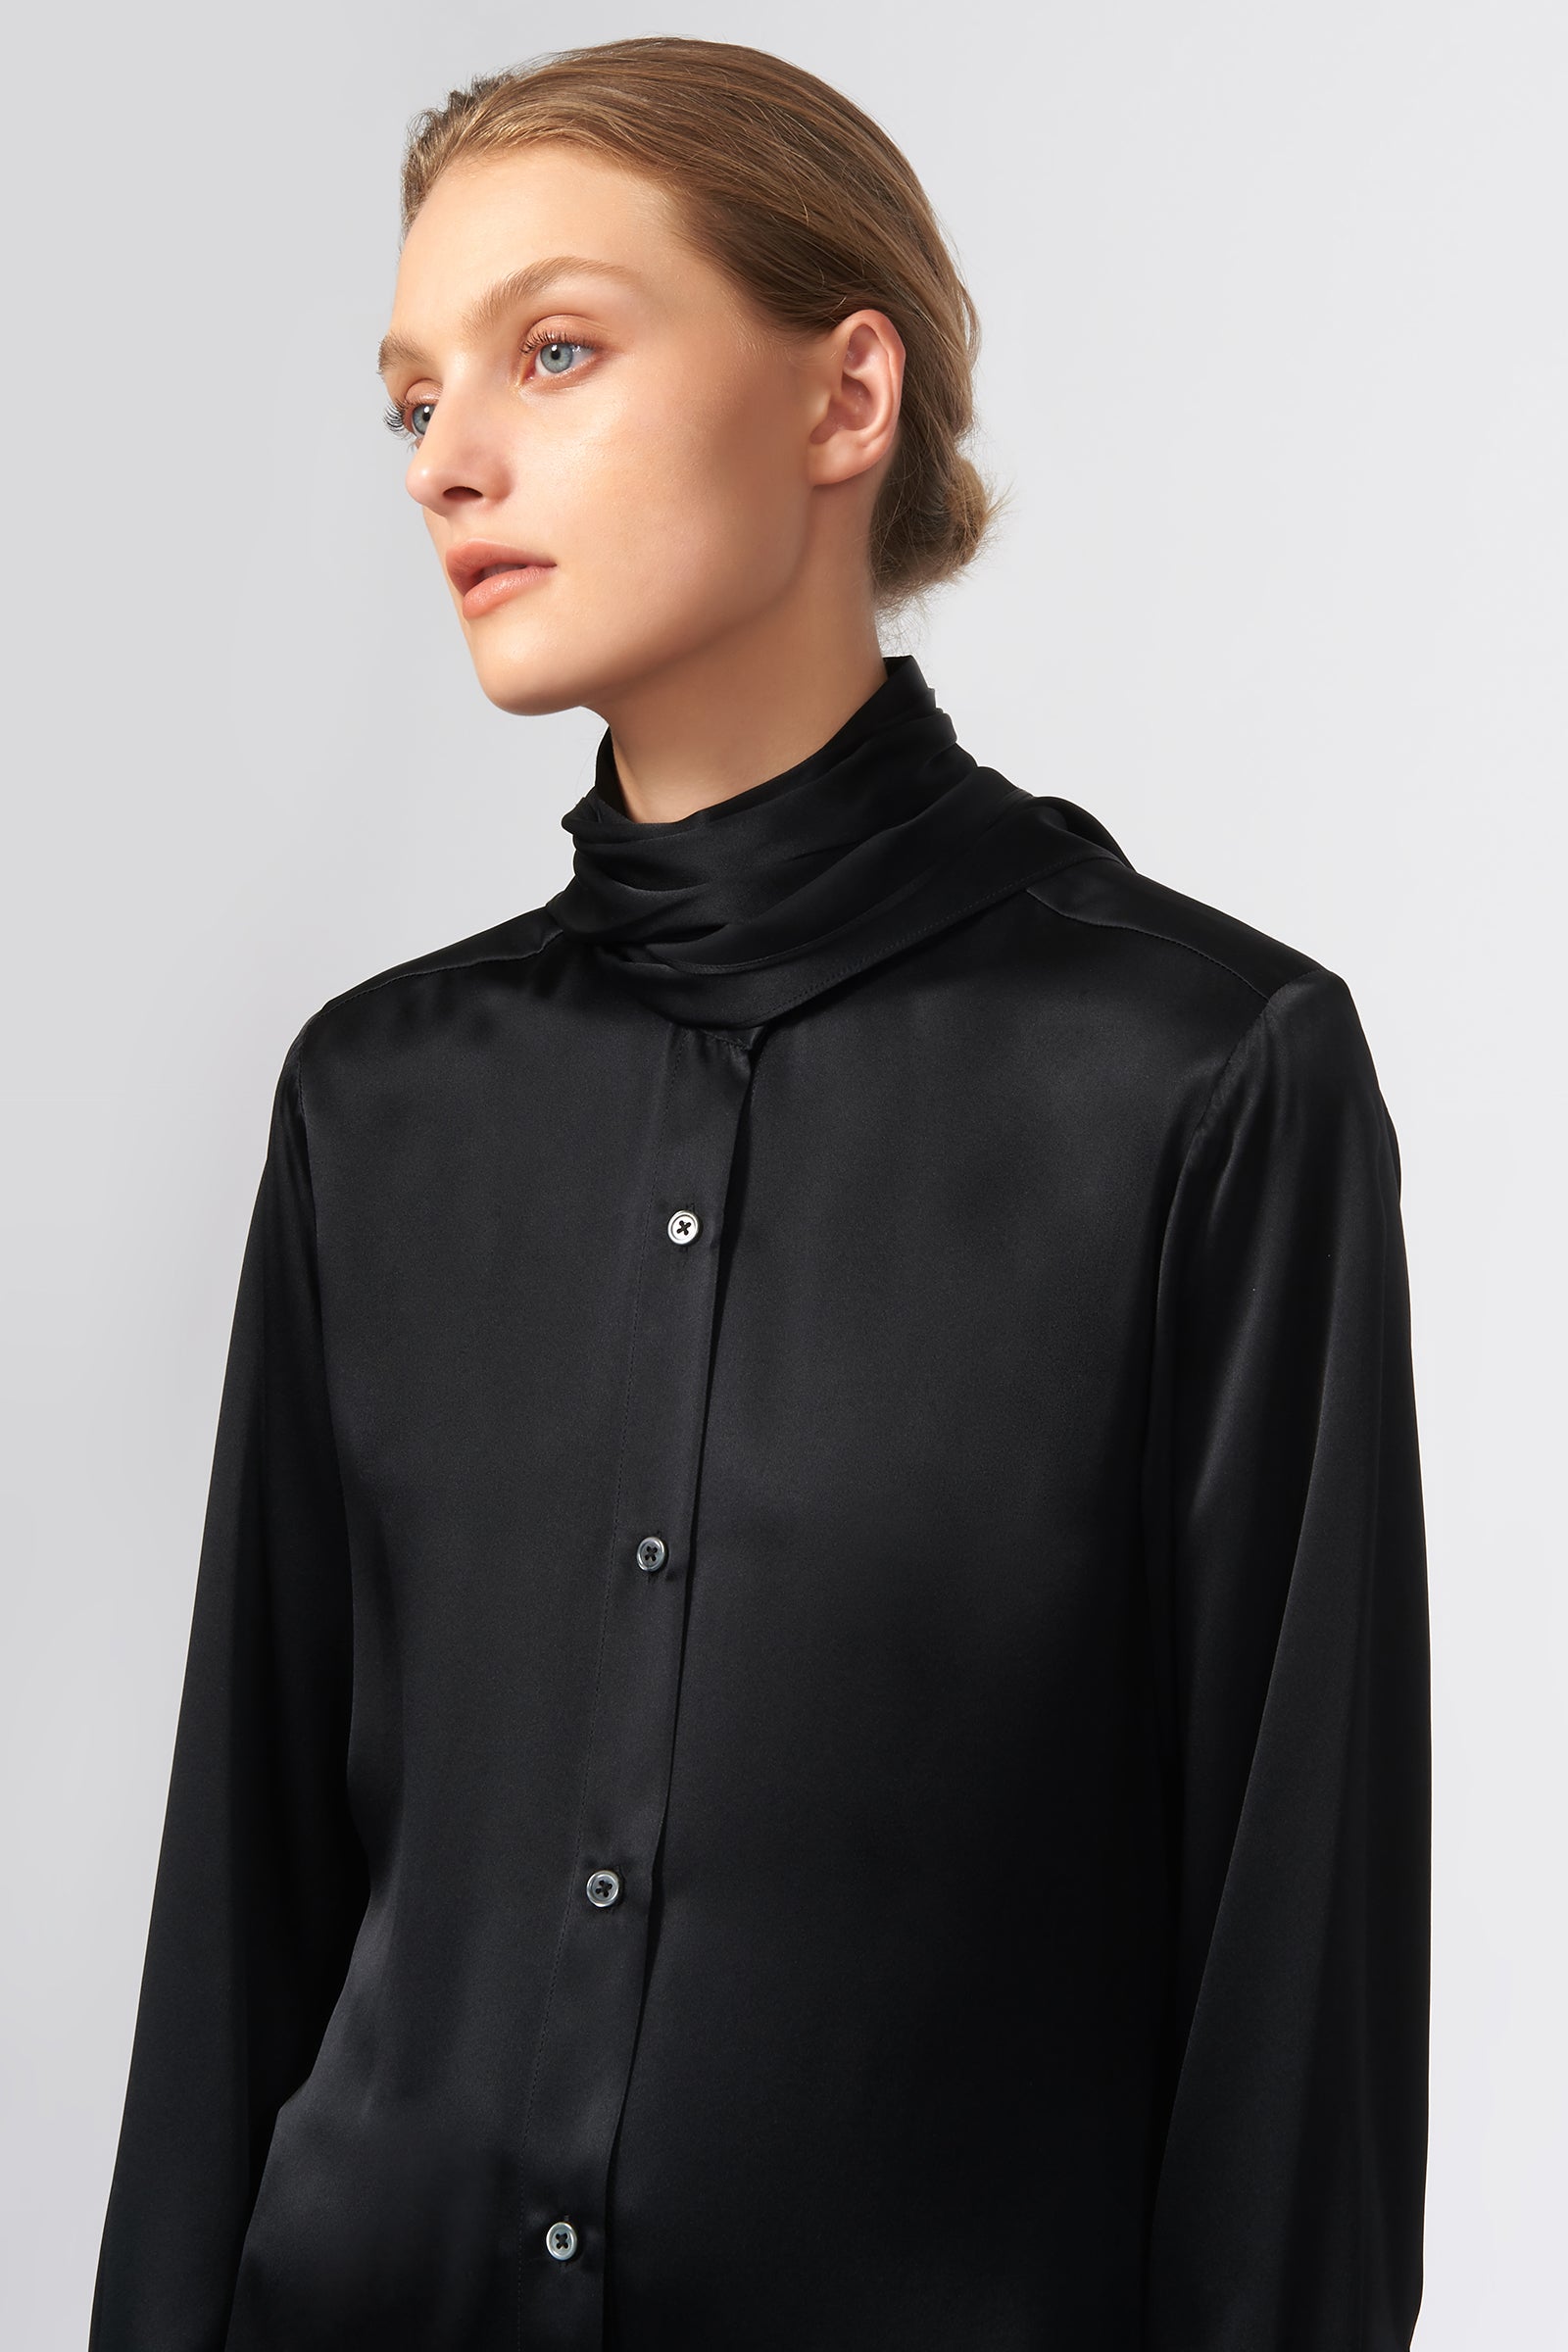 Scarf Tie Blouse in Black Made From 100% Silk – KAL RIEMAN